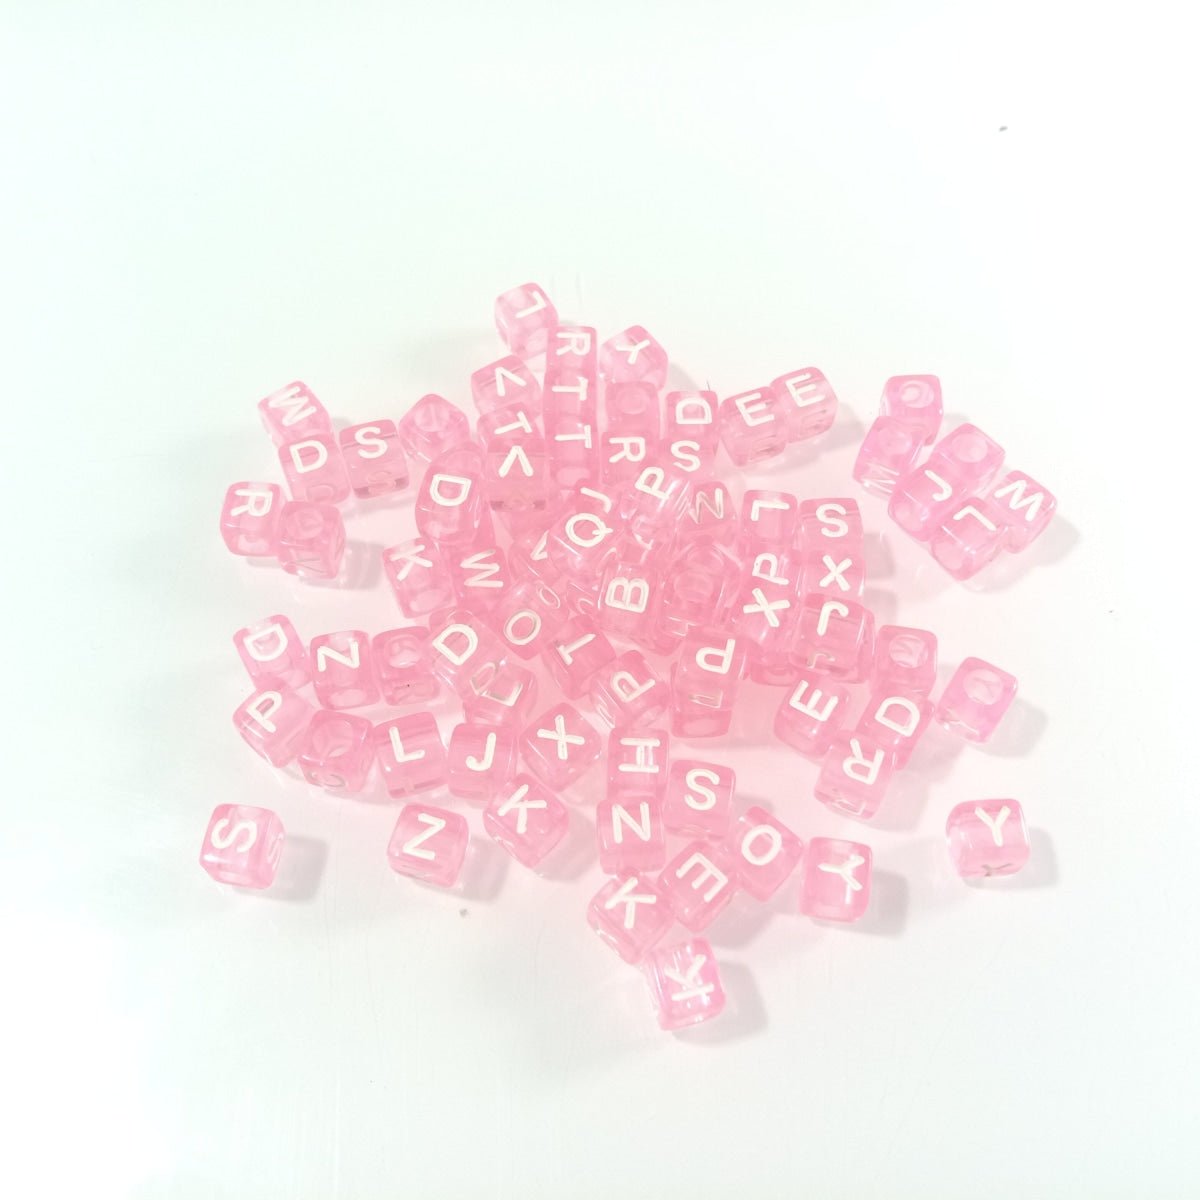 100pcs 6x6mm Square Beads Letters Alphabet Dice DIY Jewellery Making Moon Love Heart Cloud Star - White on Pink - - Asia Sell